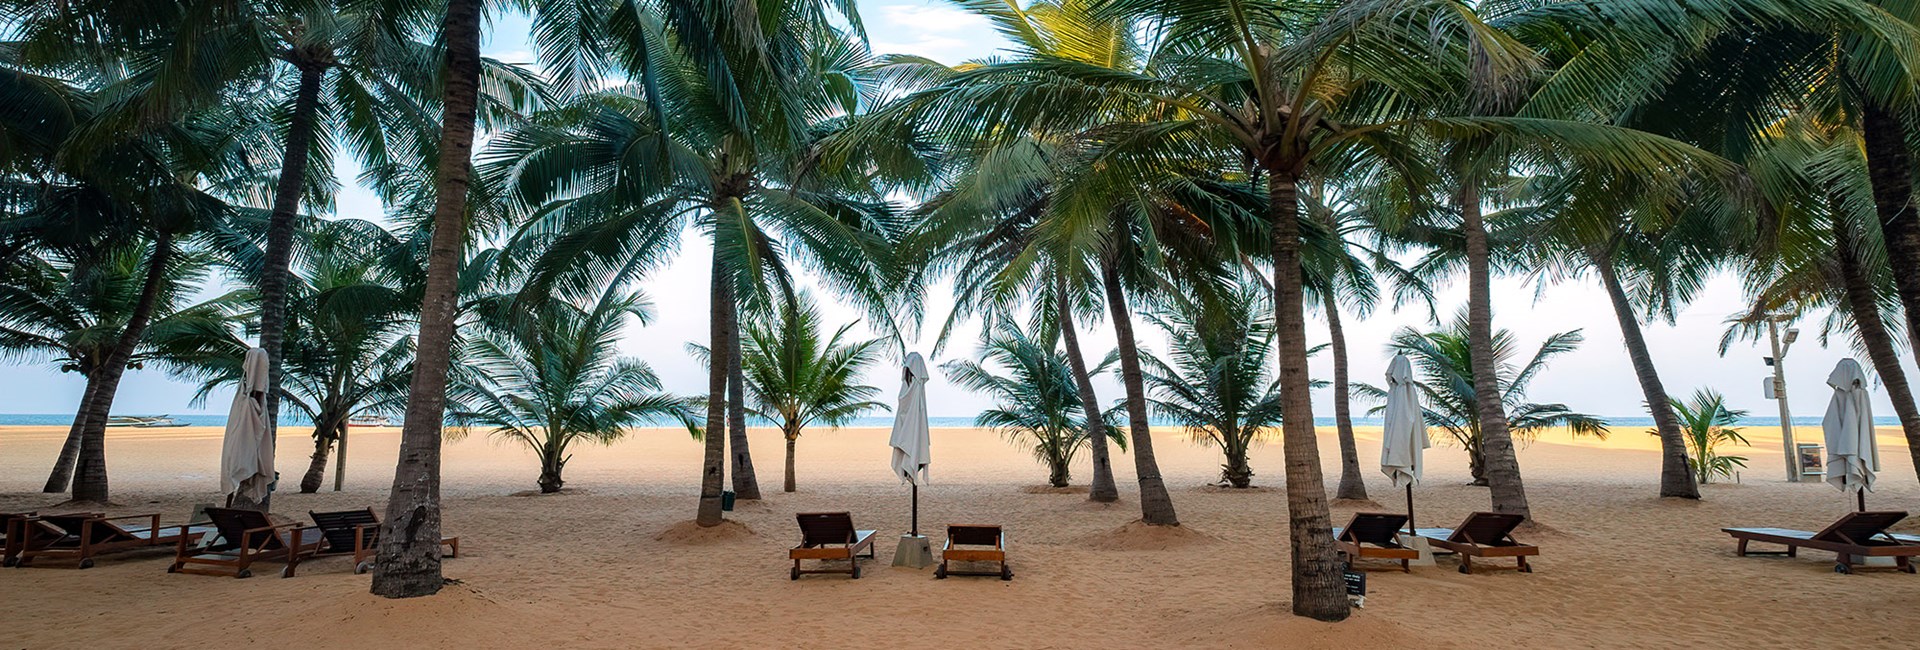 Wooden sun loungers lined up on a golden sand beach underneath palm trees